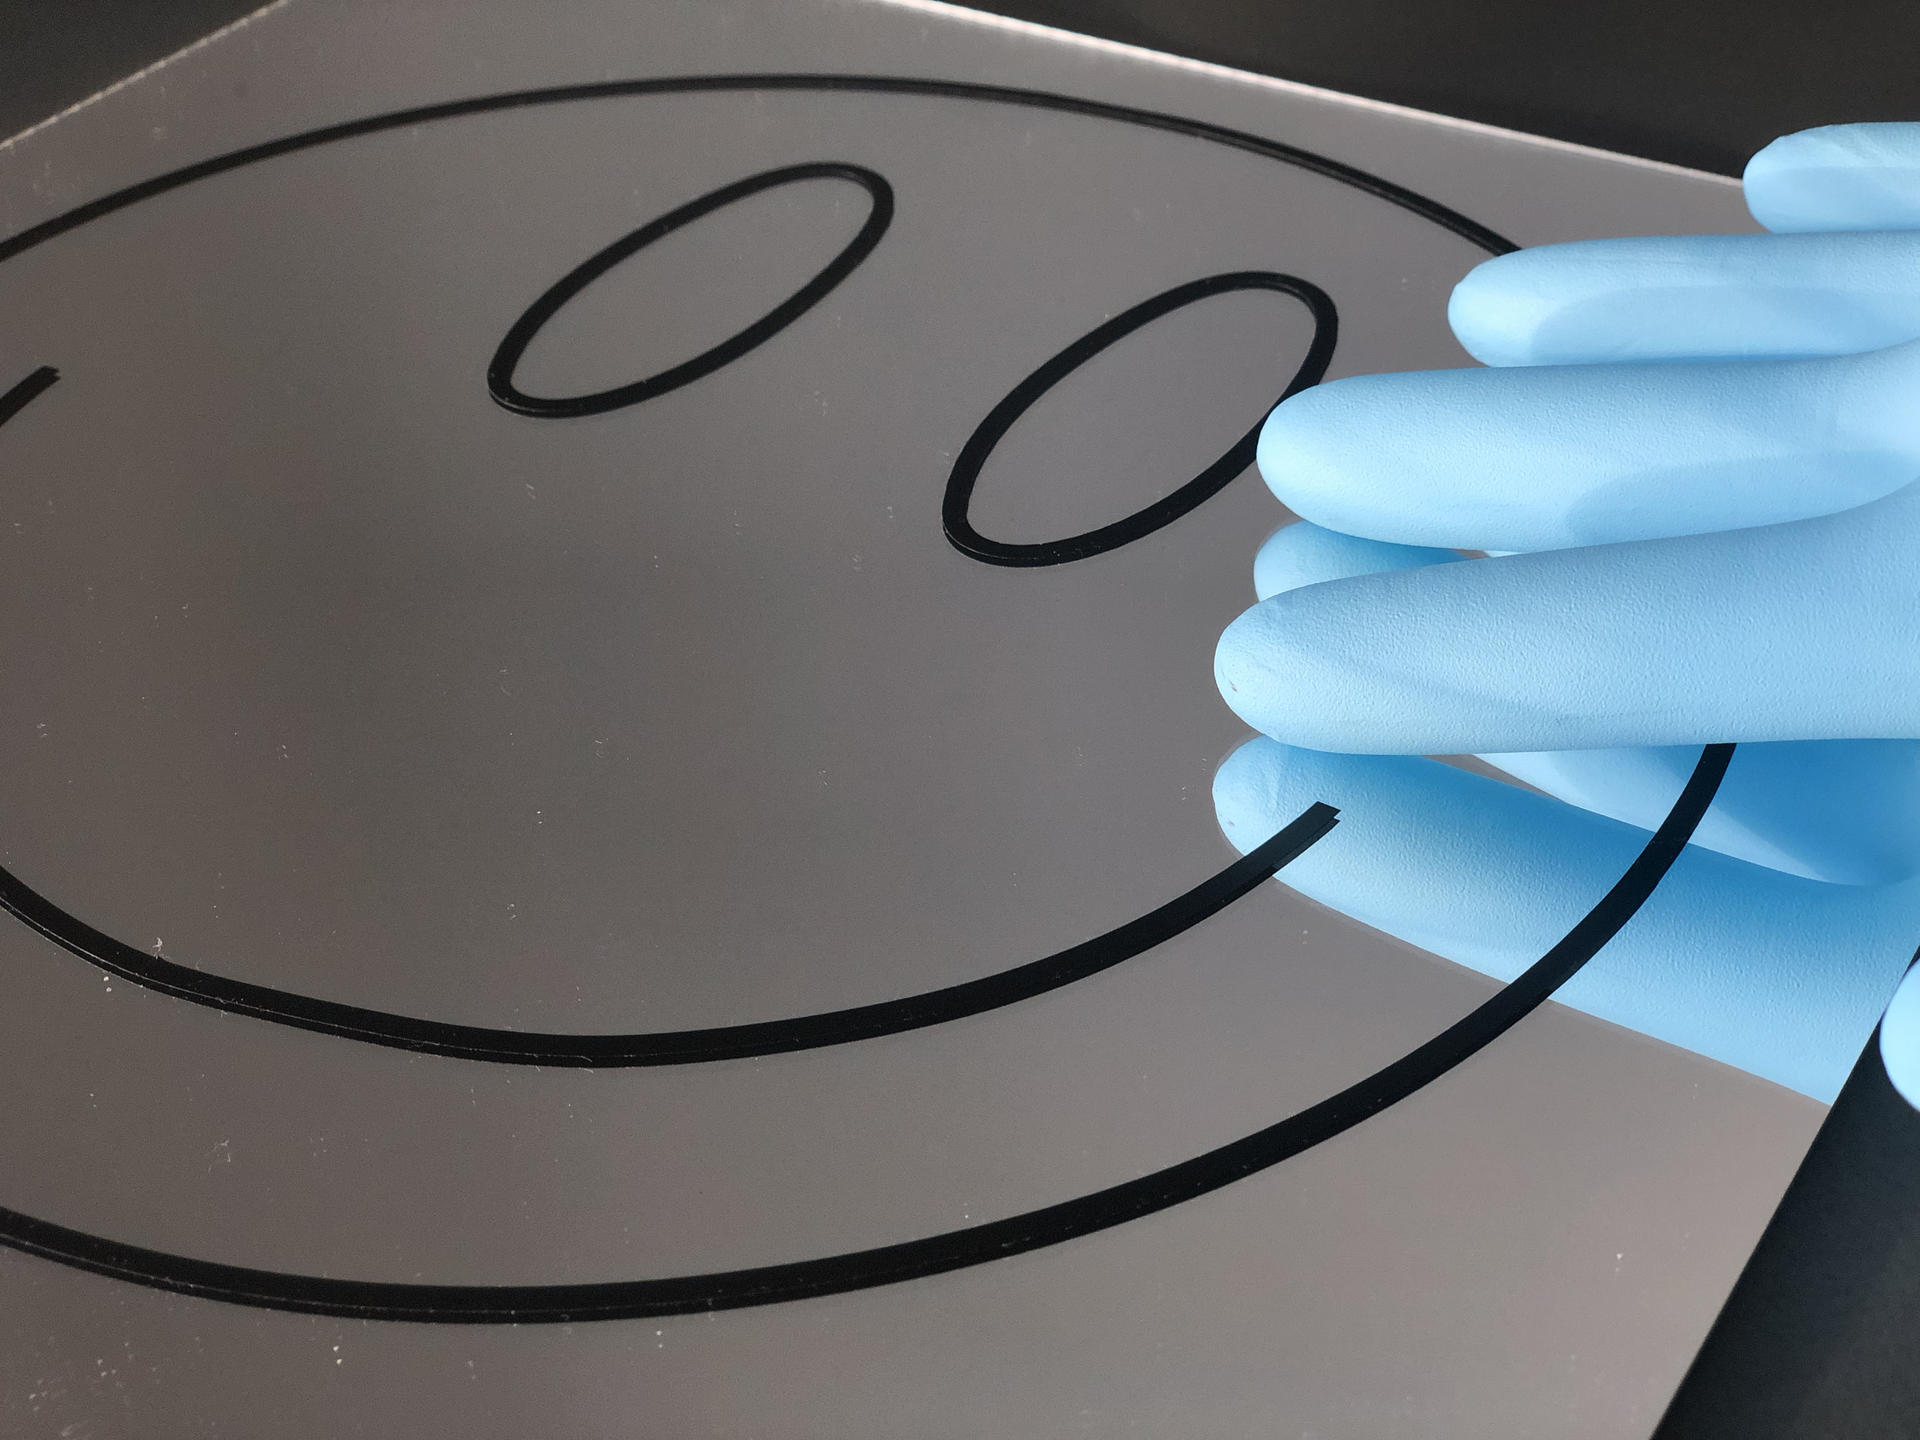 Smiley face graphic on a mirror with a blue-gloved hand